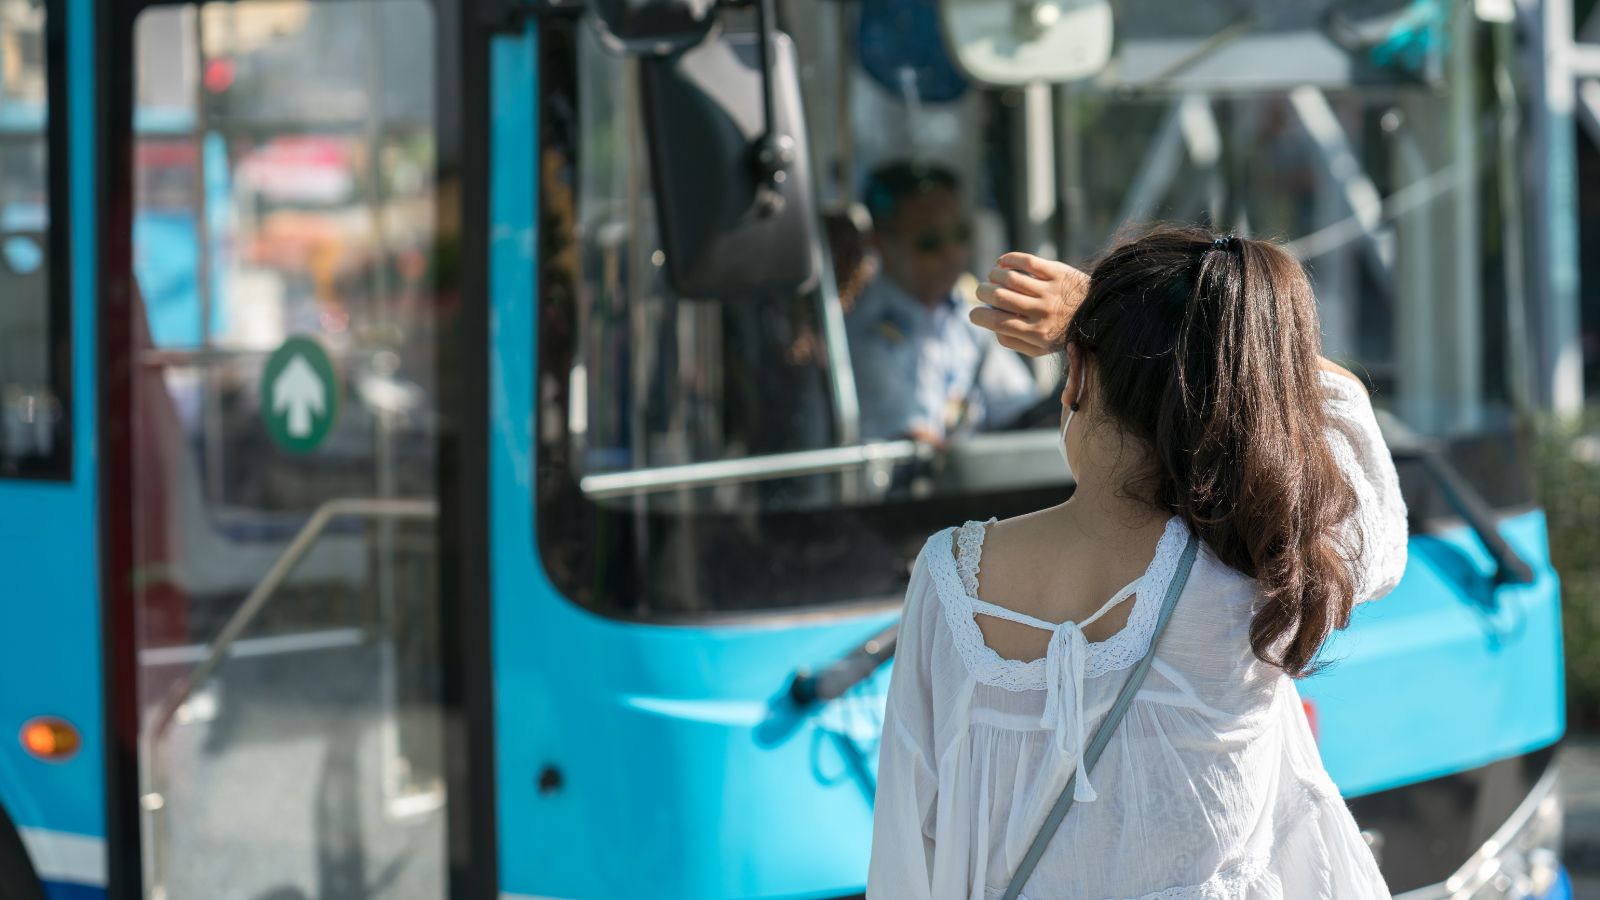 People Can Travel Inside The City By Bus